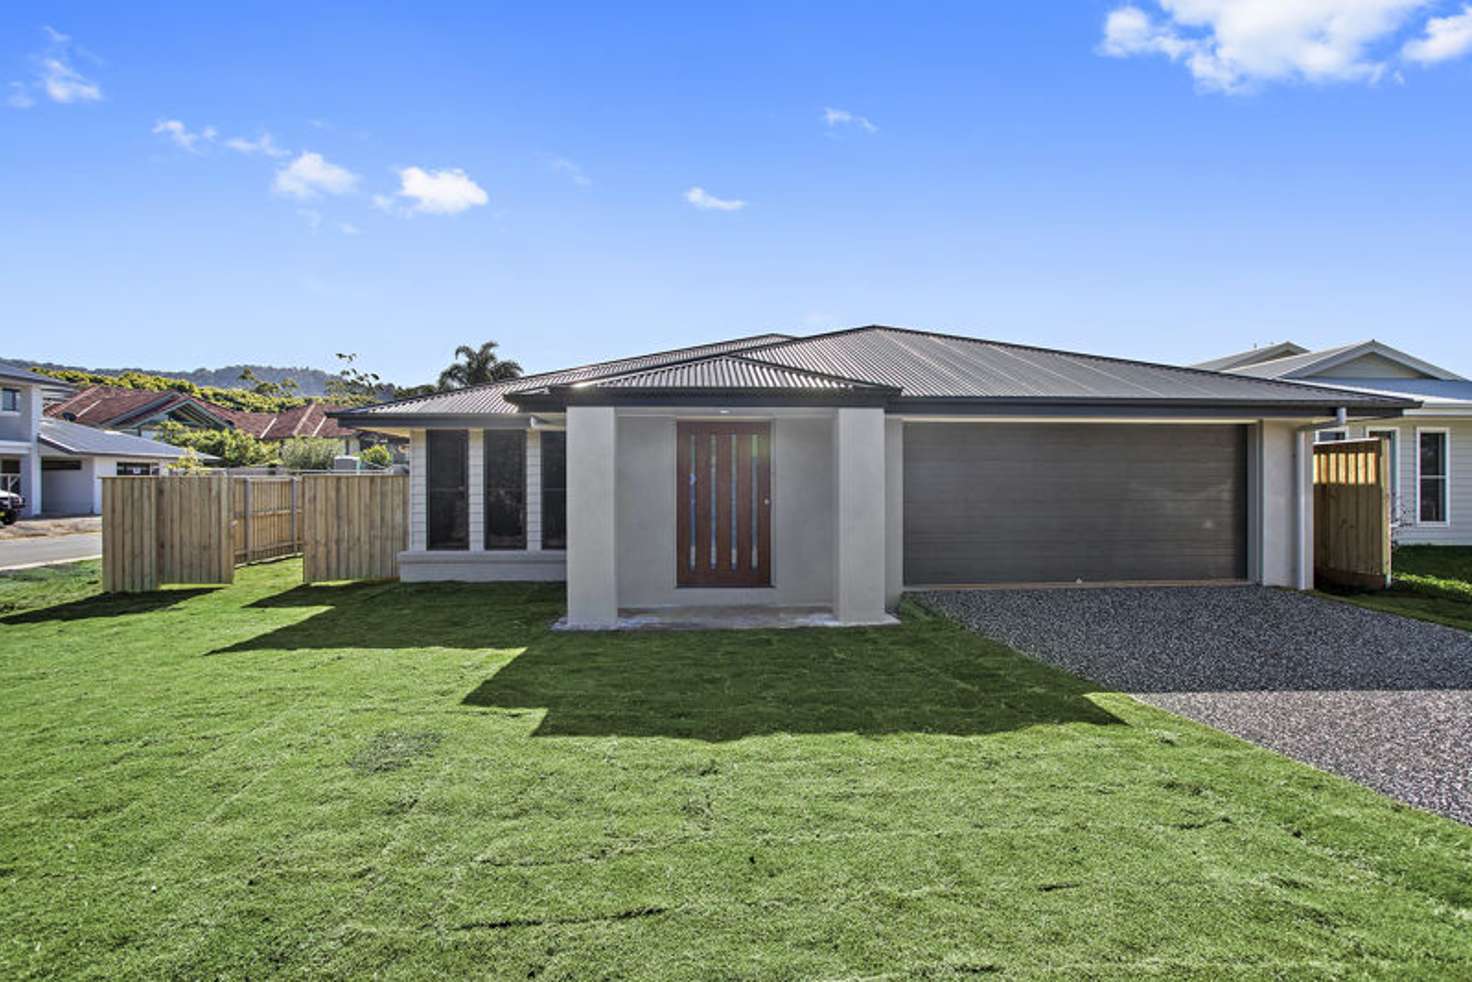 Main view of Homely house listing, 5 Trevally St, Korora NSW 2450